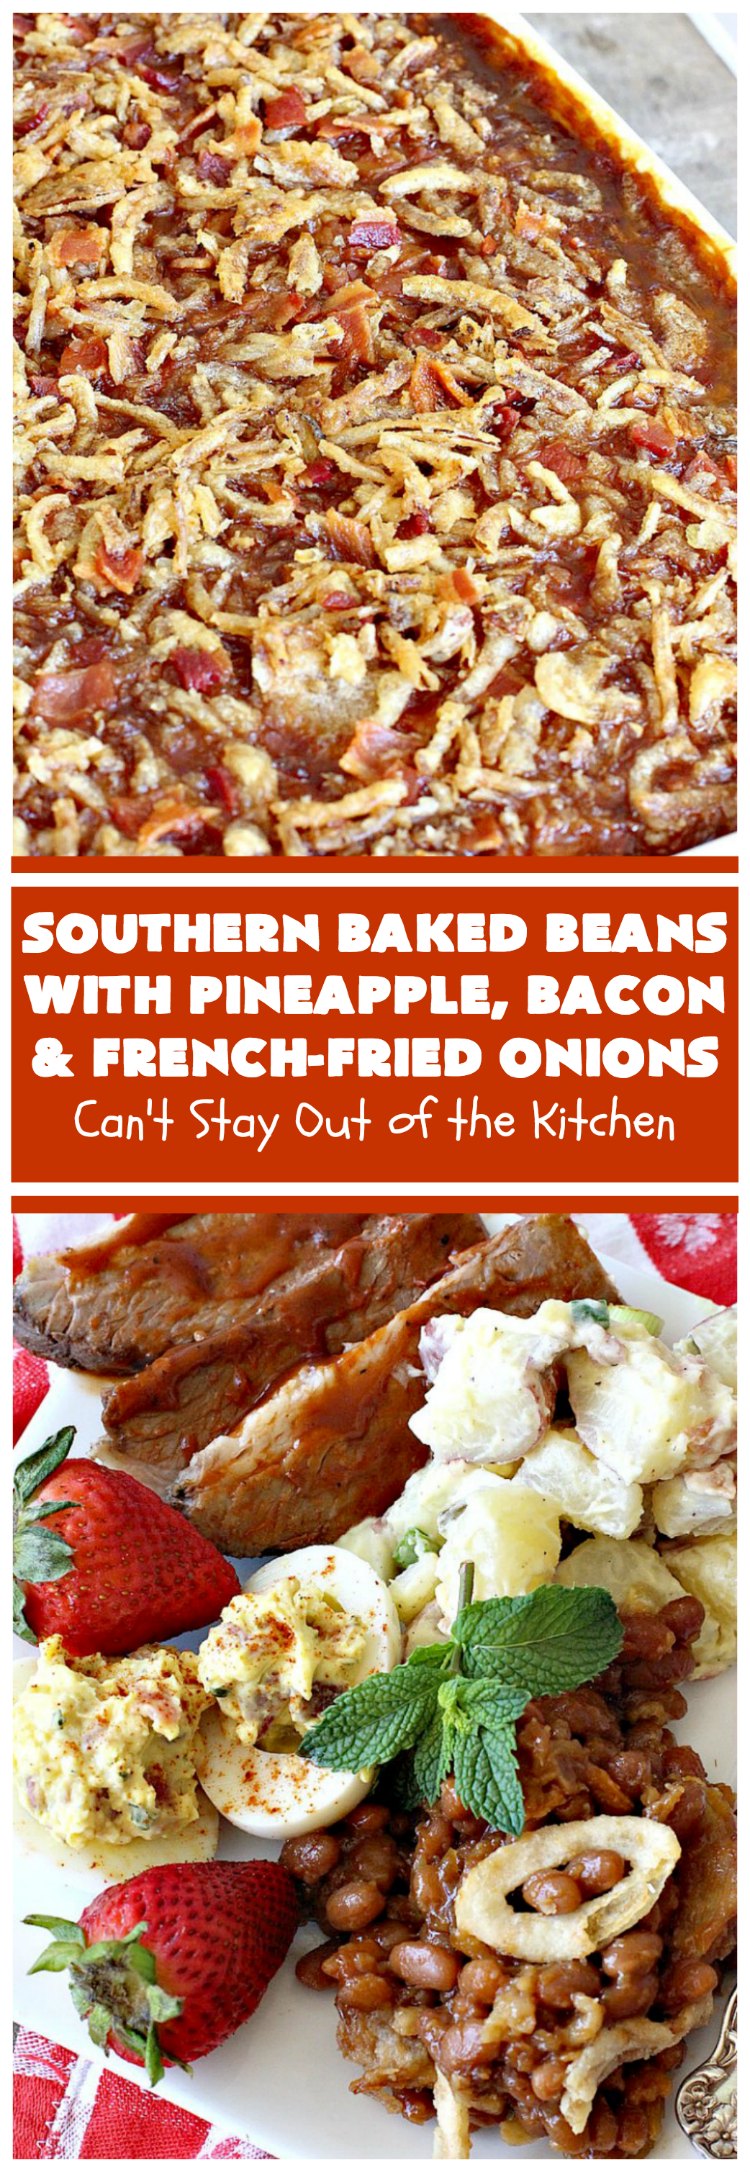 Southern Baked Beans with Pineapple | Can't Stay Out of the Kitchen